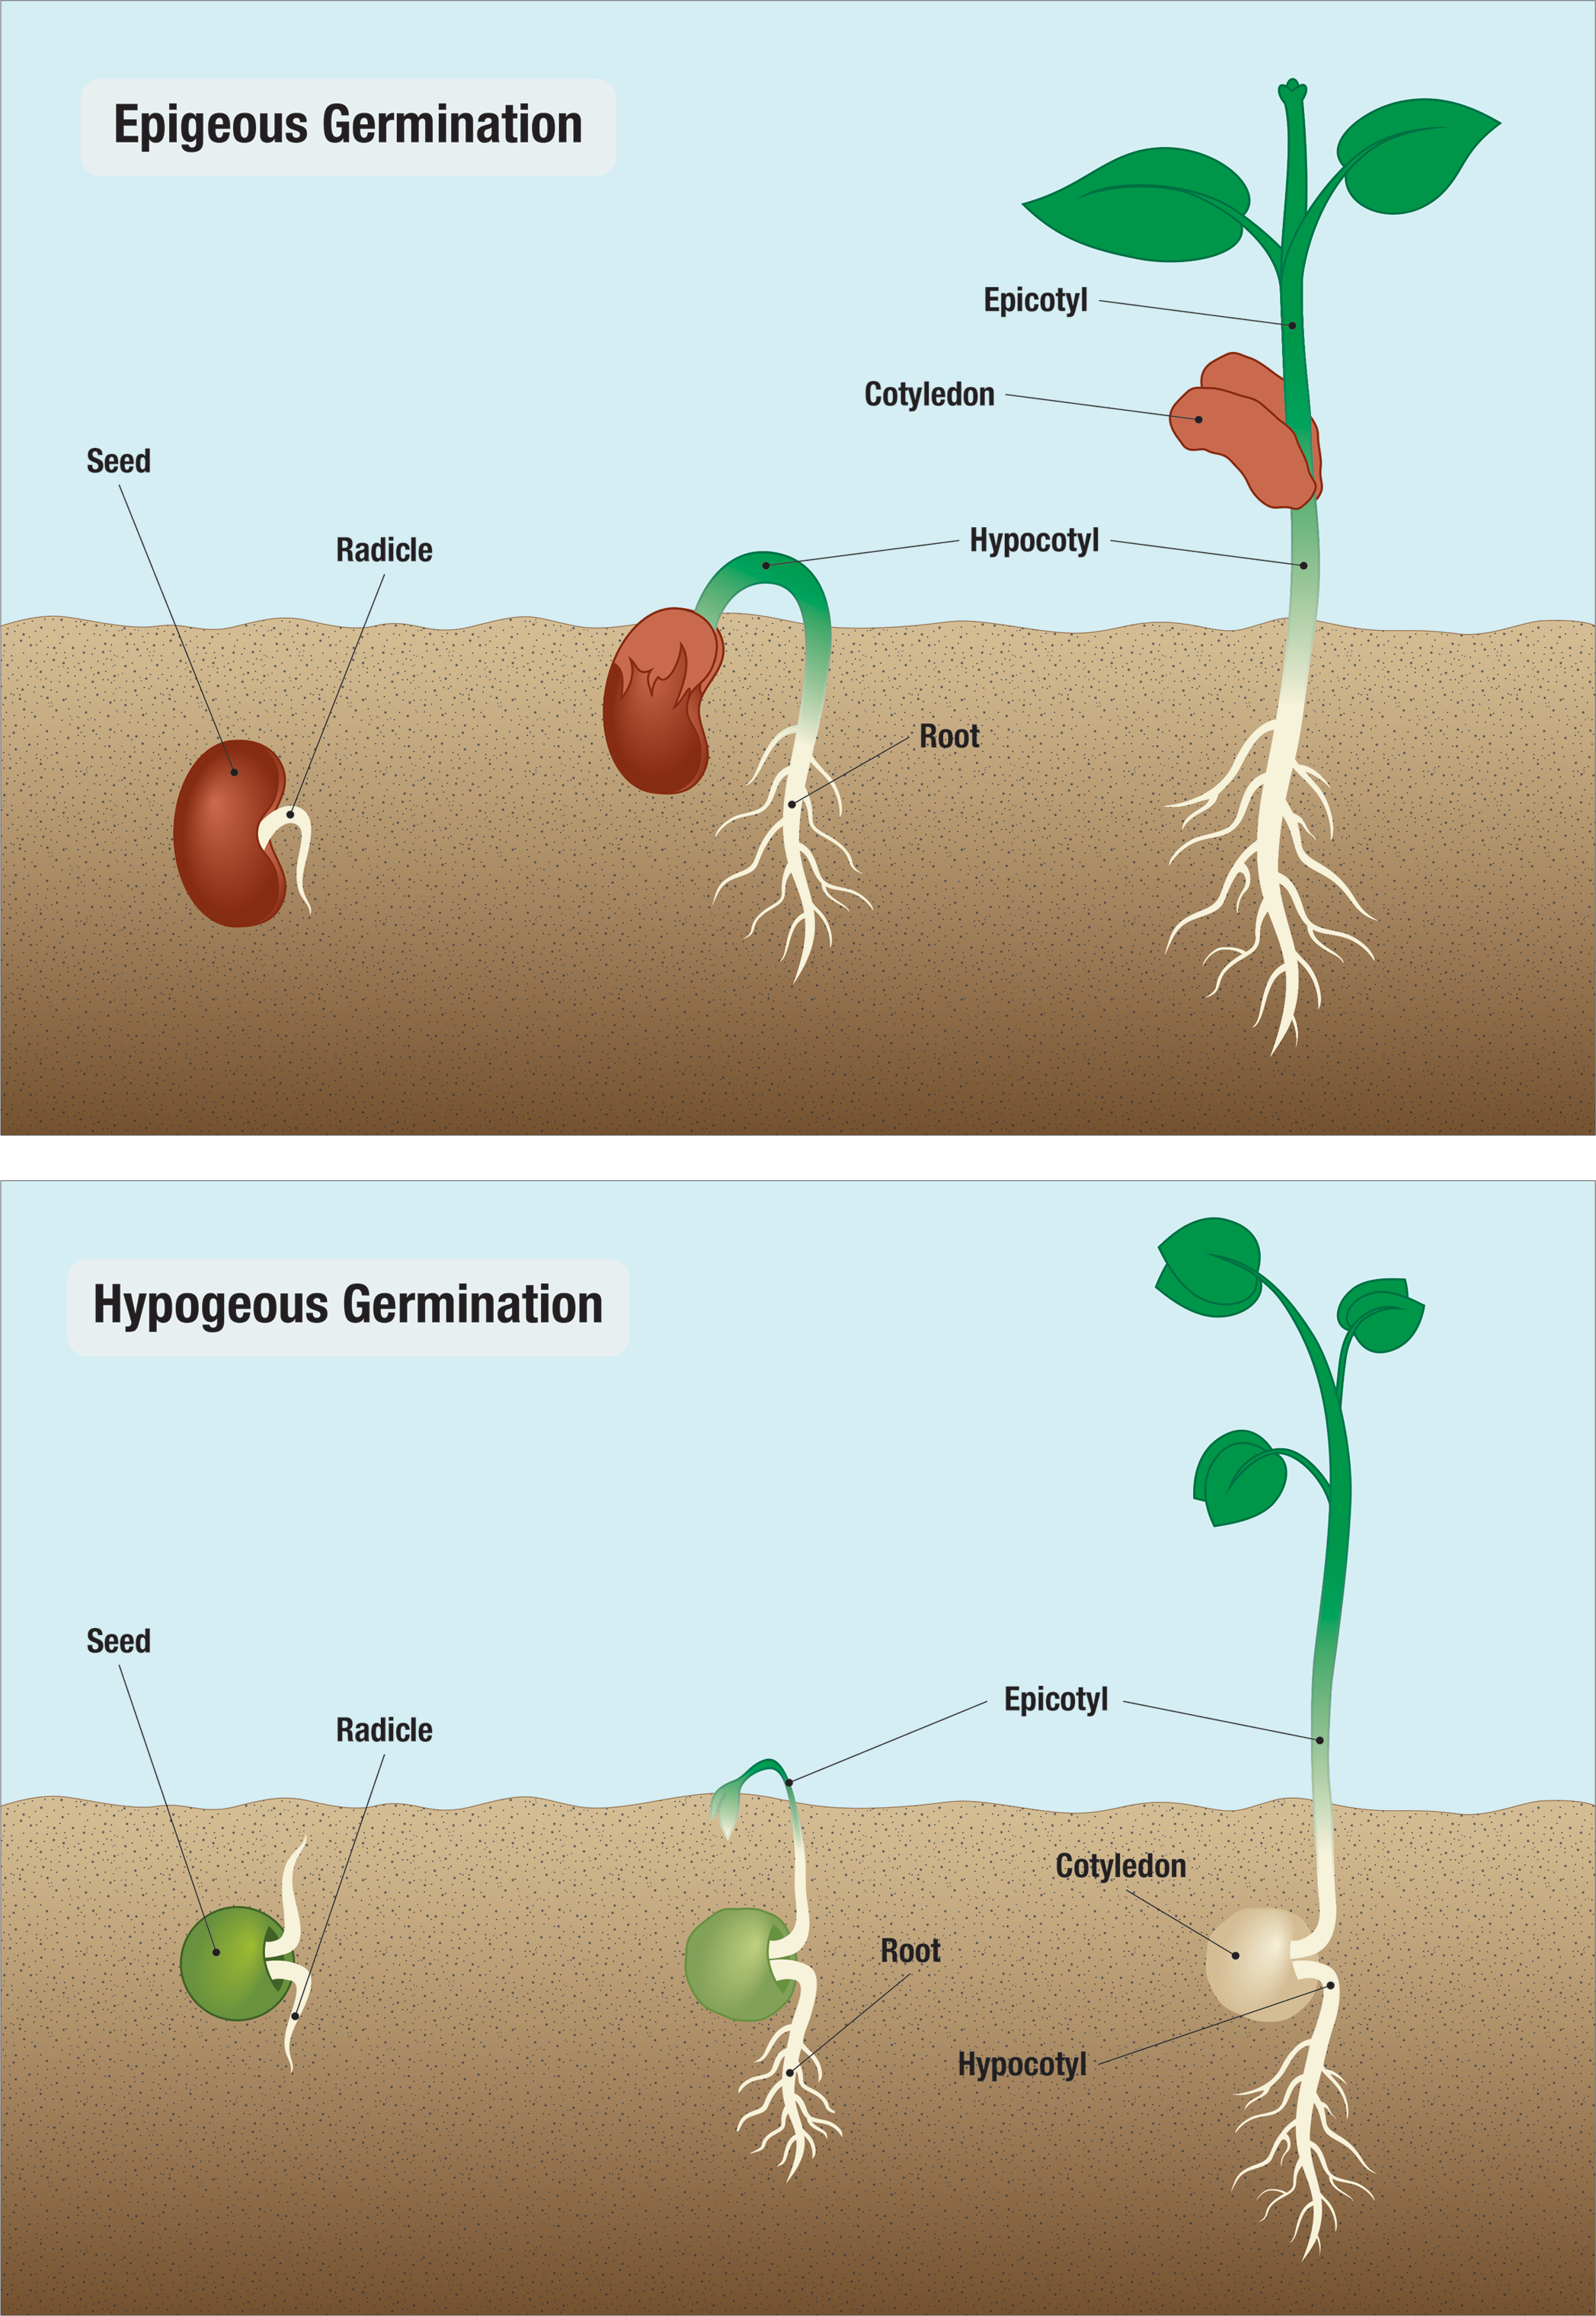 Germination of a bean and pea seedling illustrates epigeous and hypogeous germination, respectively.